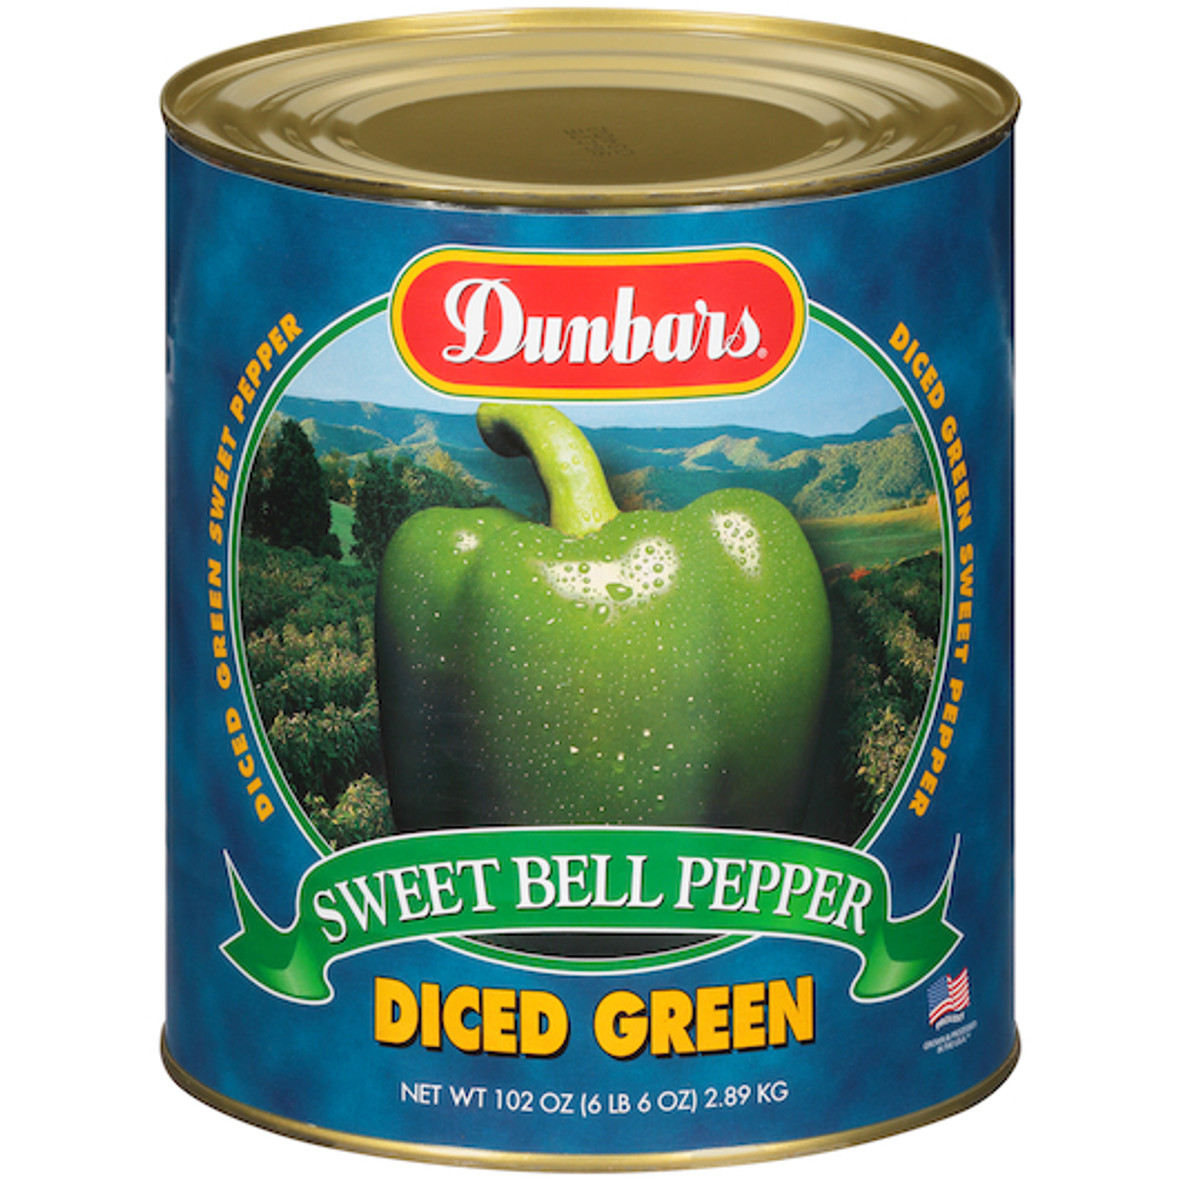 Moody Dunbar Diced Green Peppers , No. 10 Cans, 6 Per Case